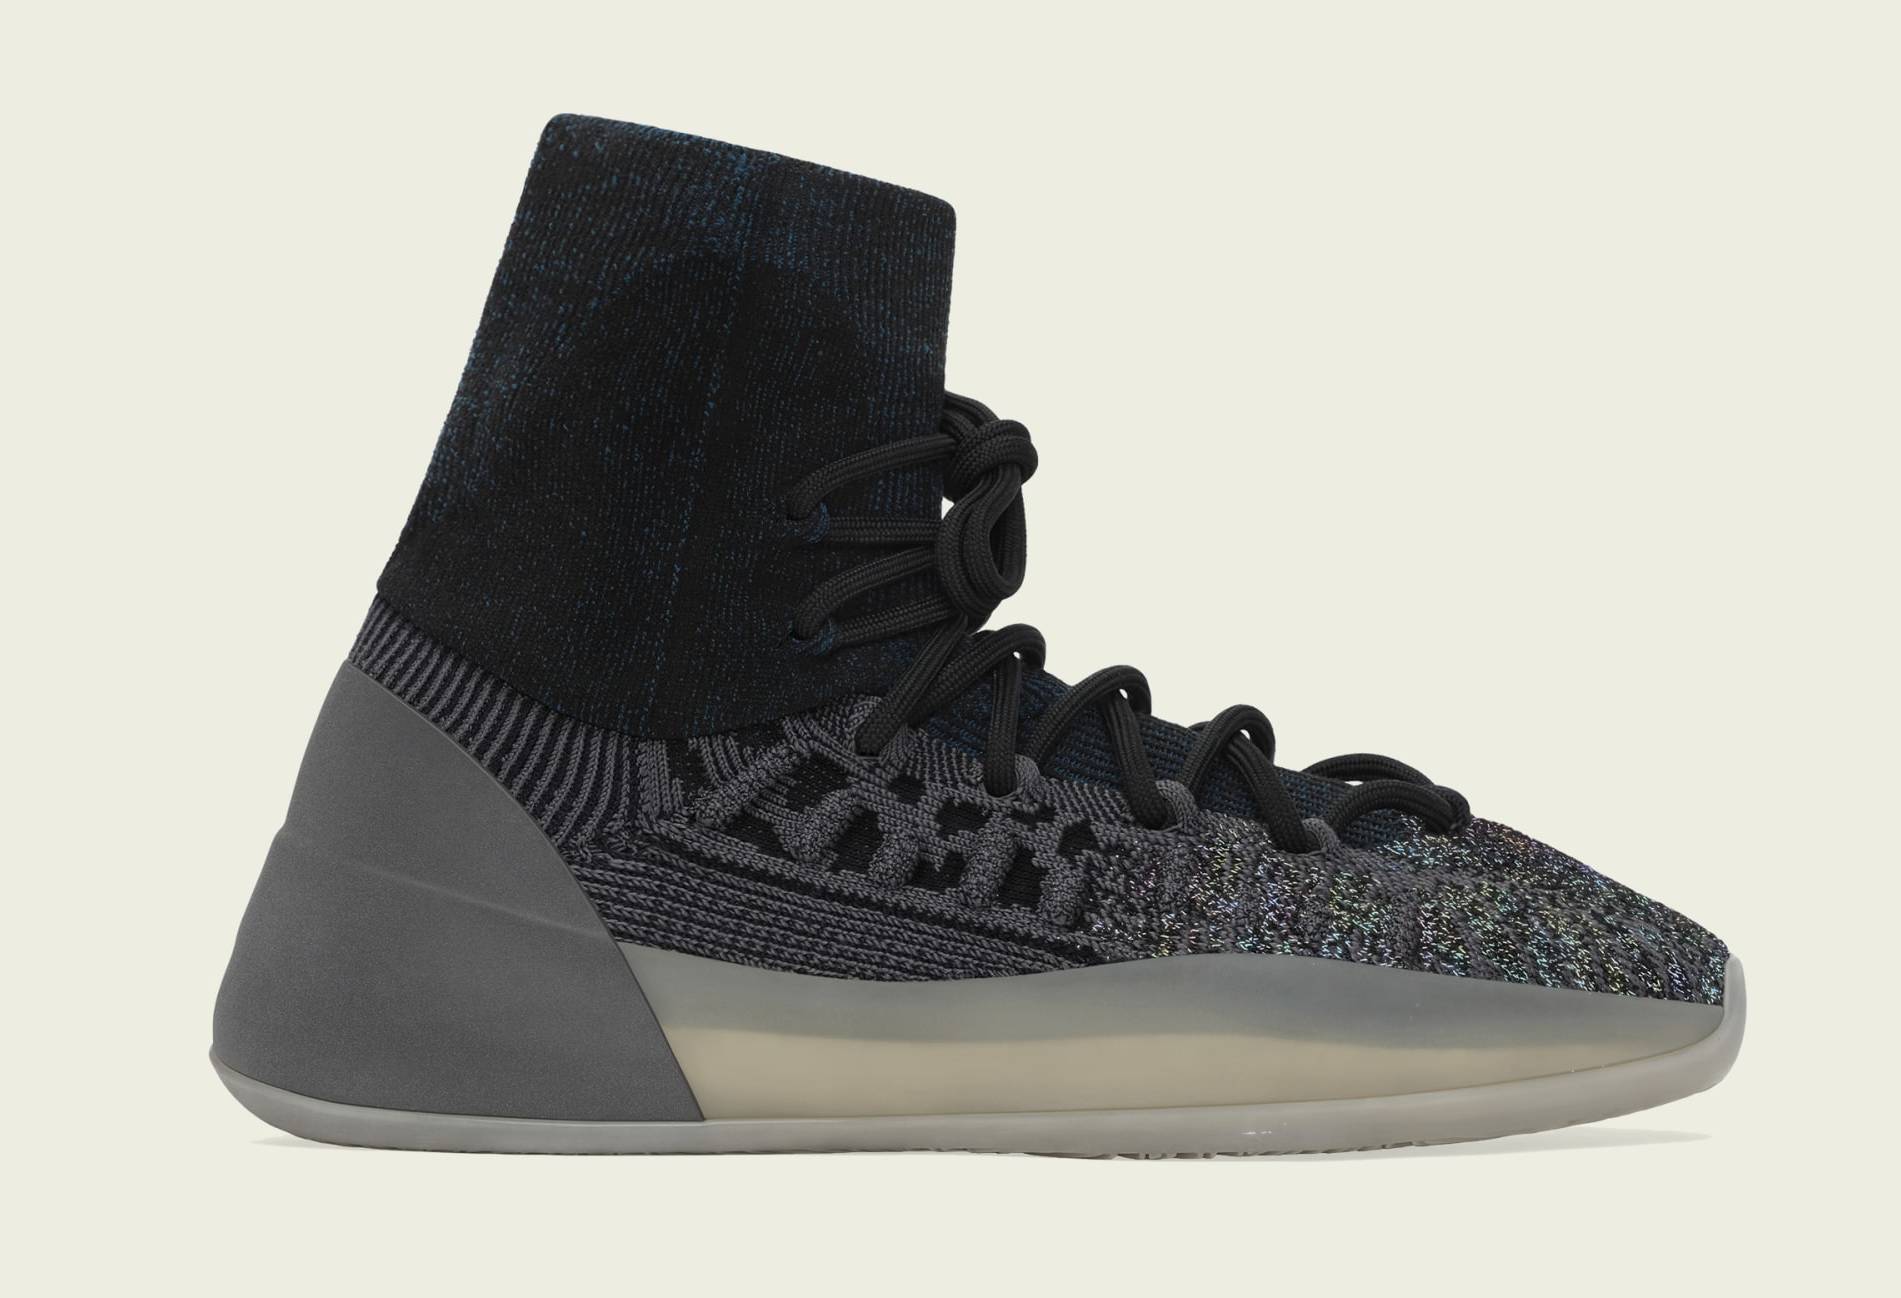 A New Adidas Yeezy Basketball Shoe Is Releasing This Week | Complex